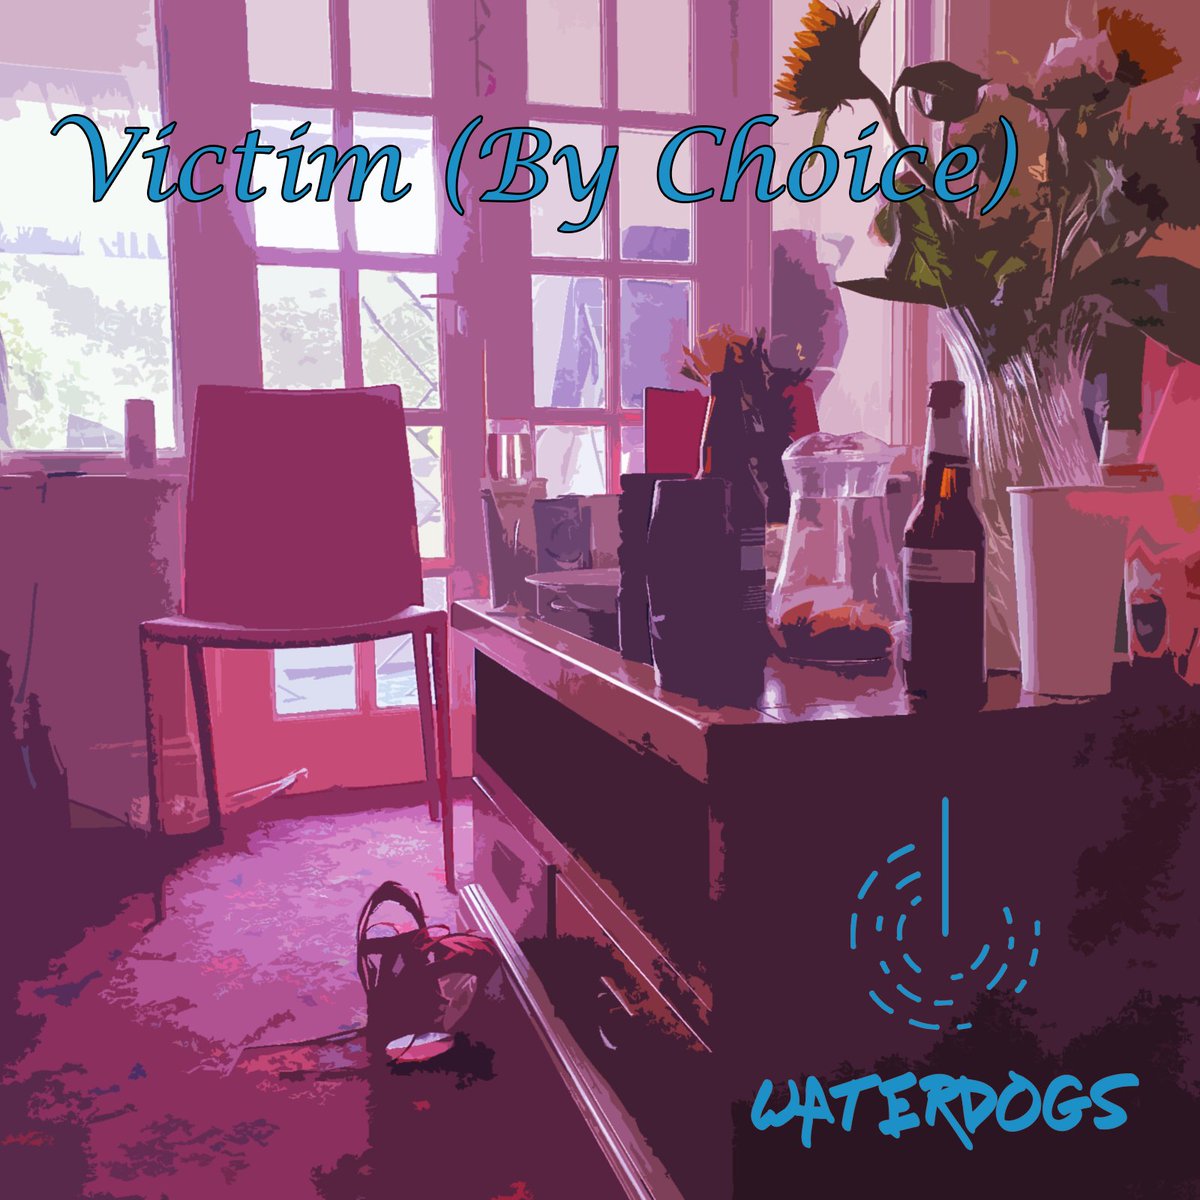 And ANOTHA ONE
... 
Our second single 'Victim (By Choice)' comes out on all streamy places next Friday 03/11/23. It's sad. It's sexy. It's jazzy funky reggae weirdness.
... 
Pre-save link in bio!

#Limerick #music #altrock #rockmusic #altmusic  #femalefronted #irishband #newmusic